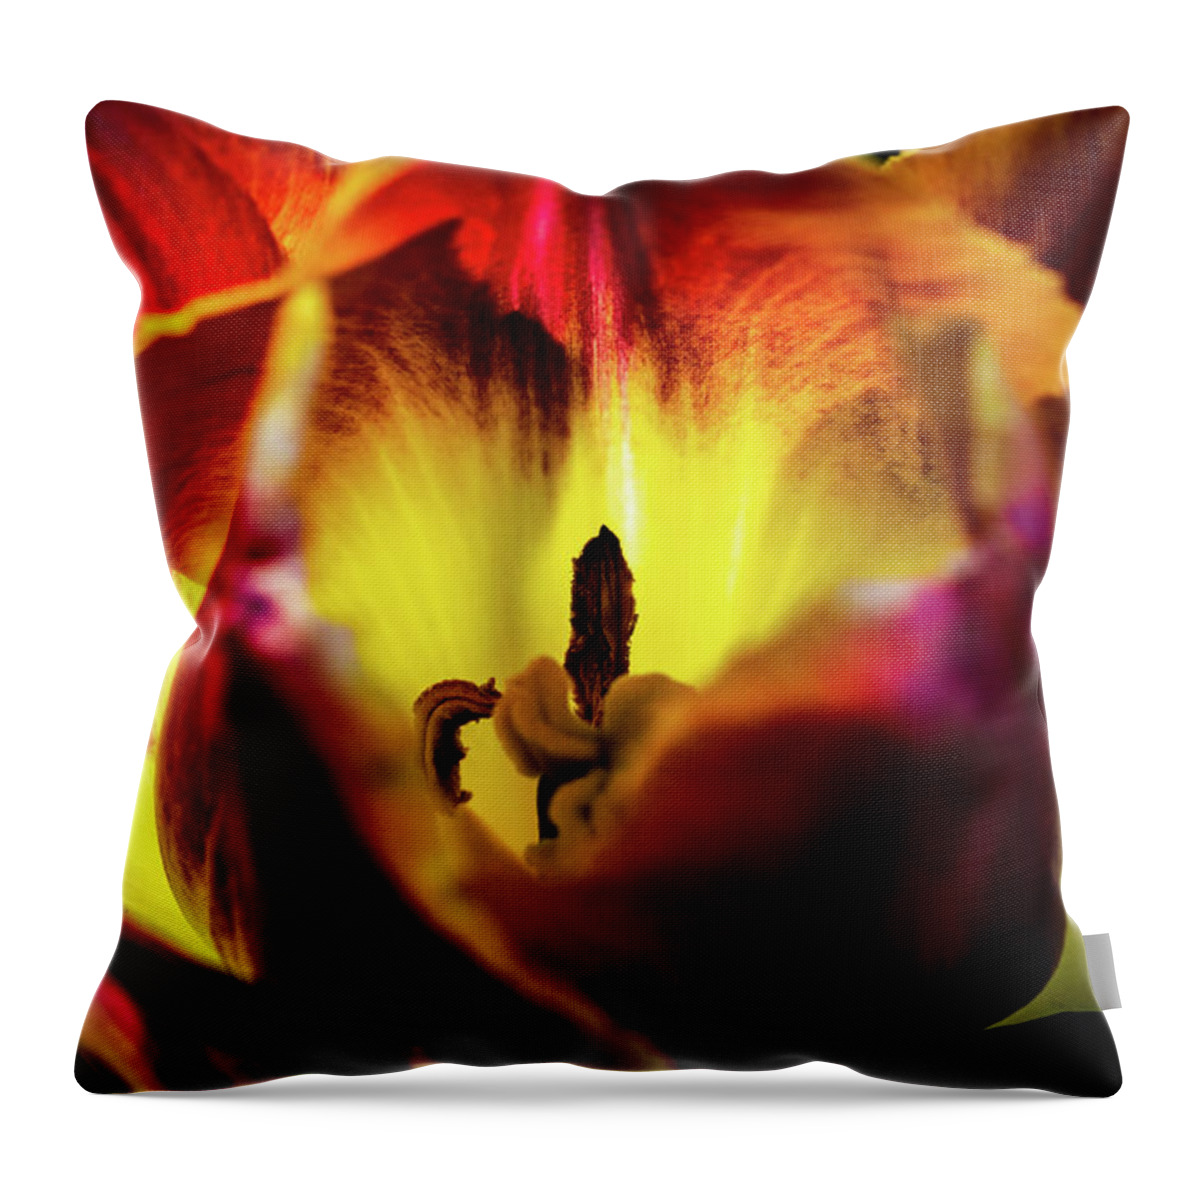 Jay Stockhaus Throw Pillow featuring the photograph Sunlit Tulip by Jay Stockhaus